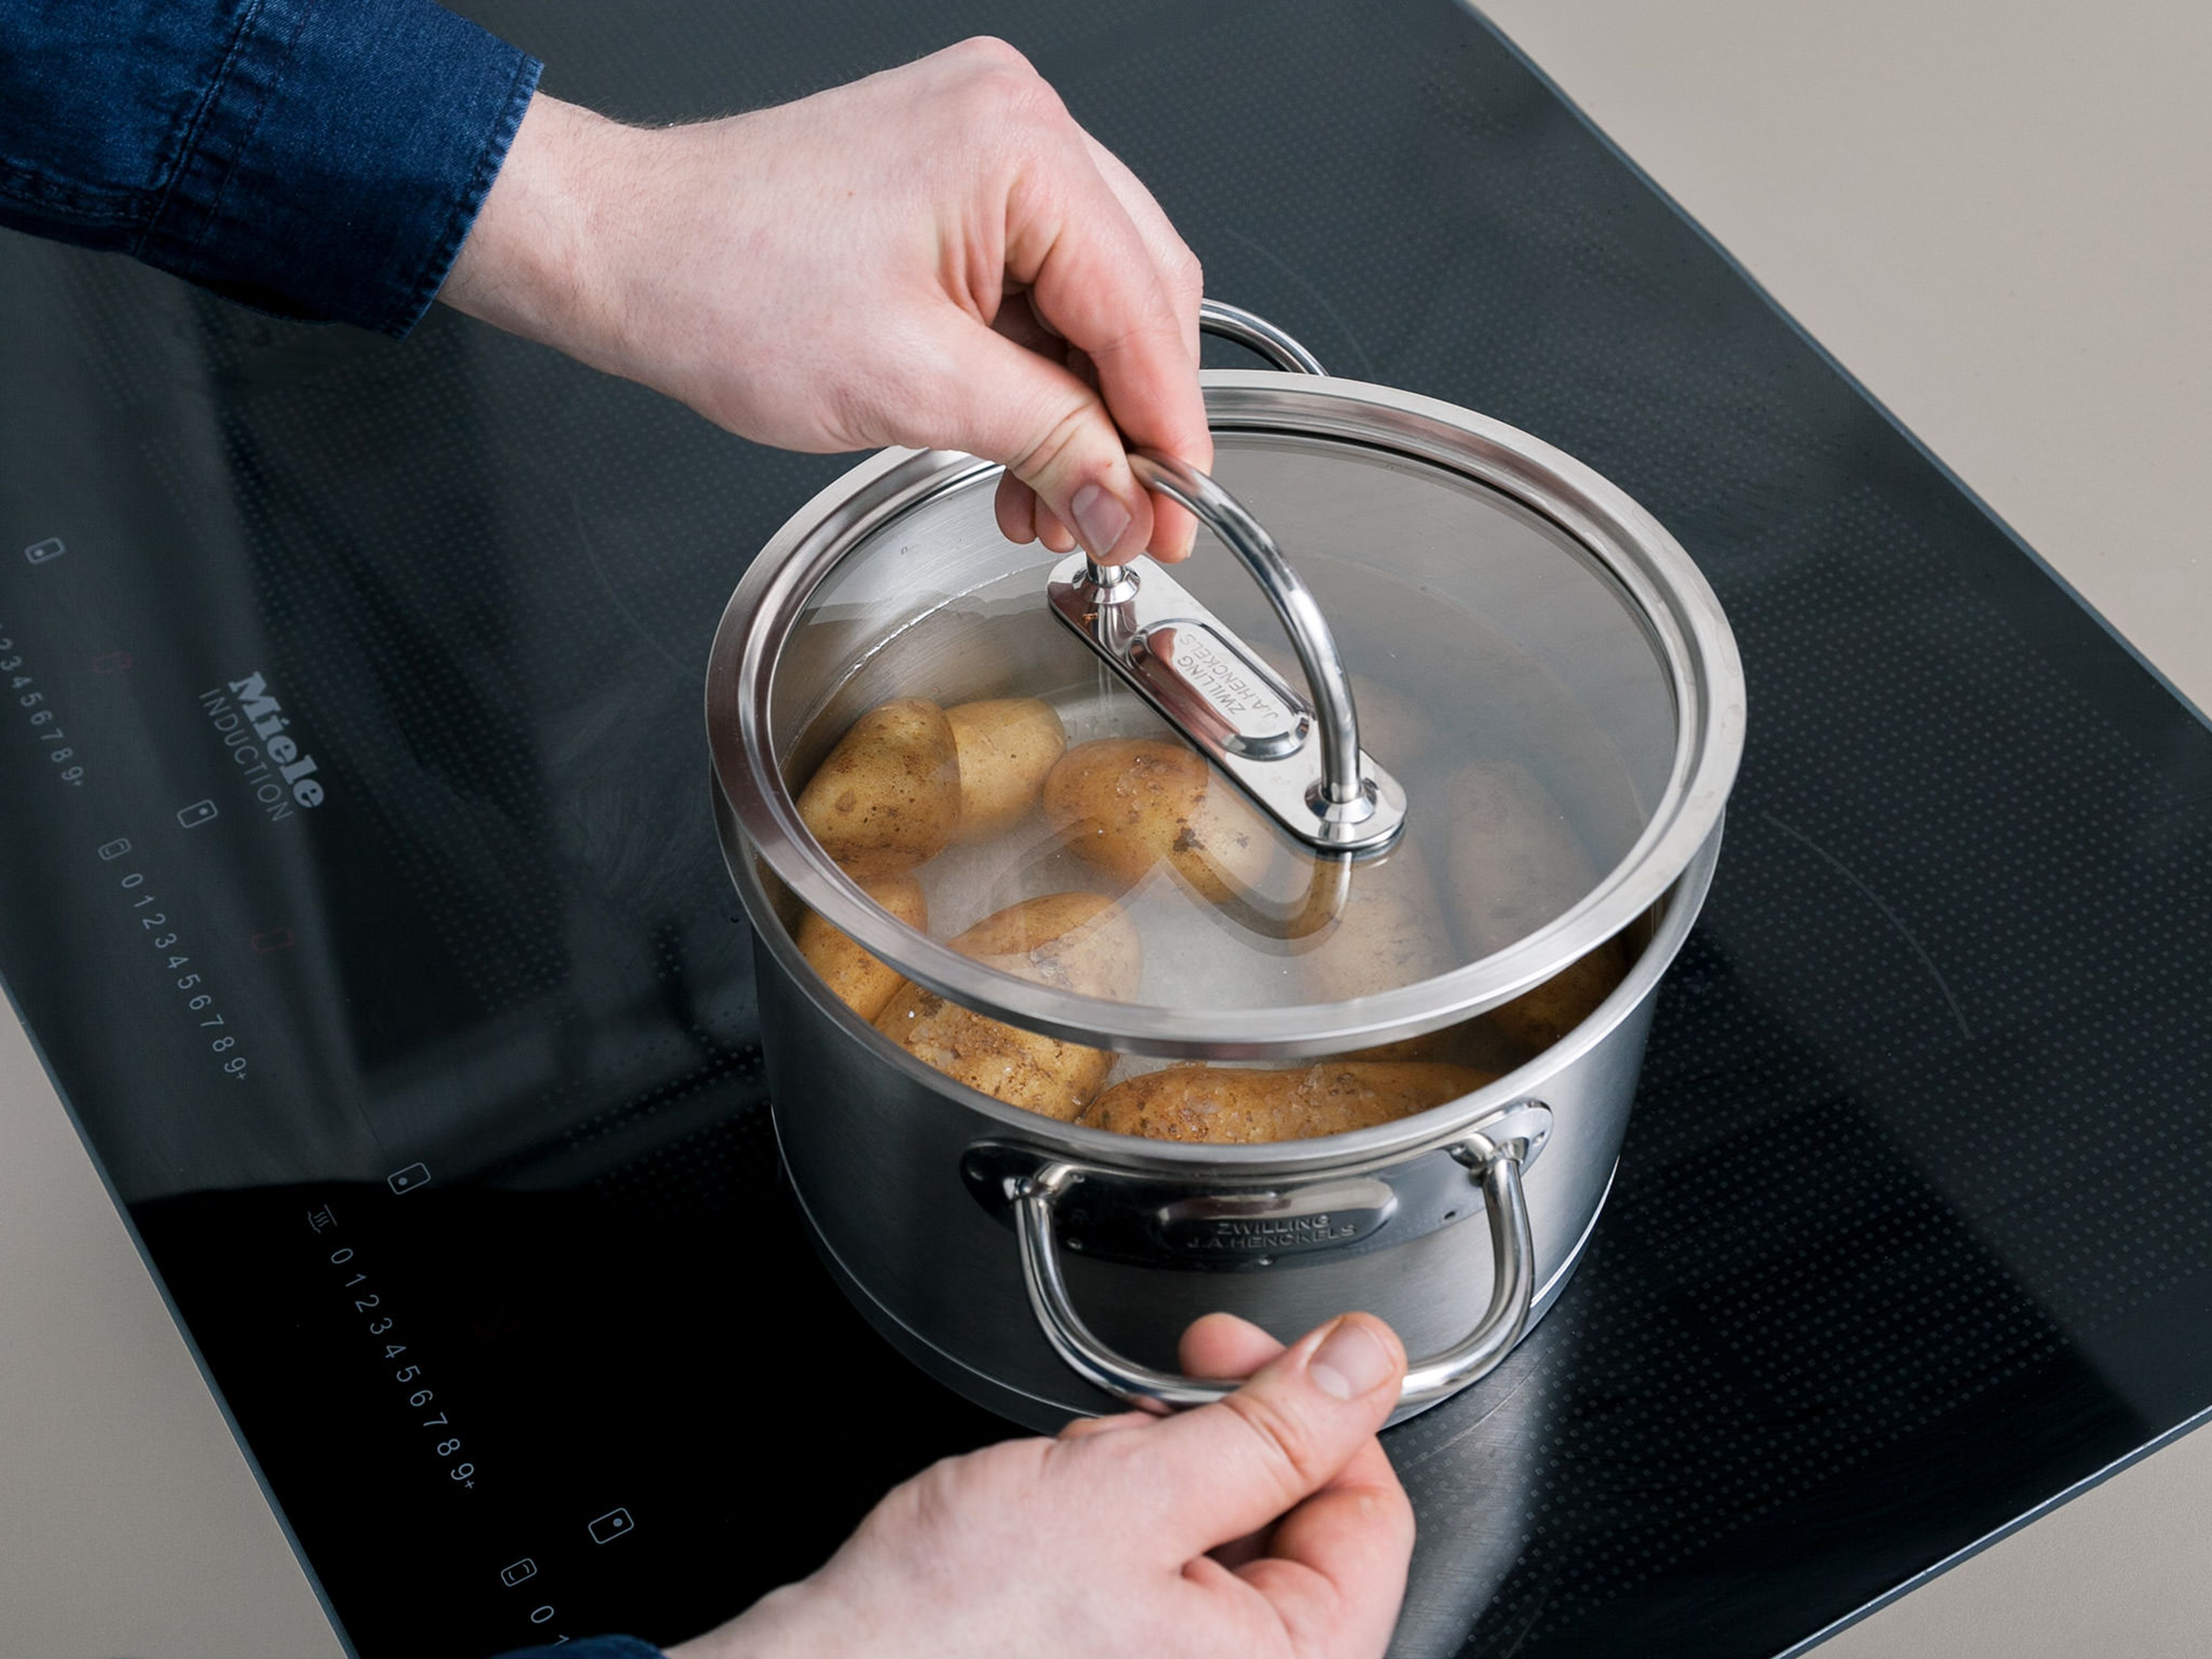 Wash potatoes thoroughly, and together with sea salt, add them to a pot. Fill the pot with water until the potatoes are fully submerged. Cover, and cook over medium heat for approx. 25 min.